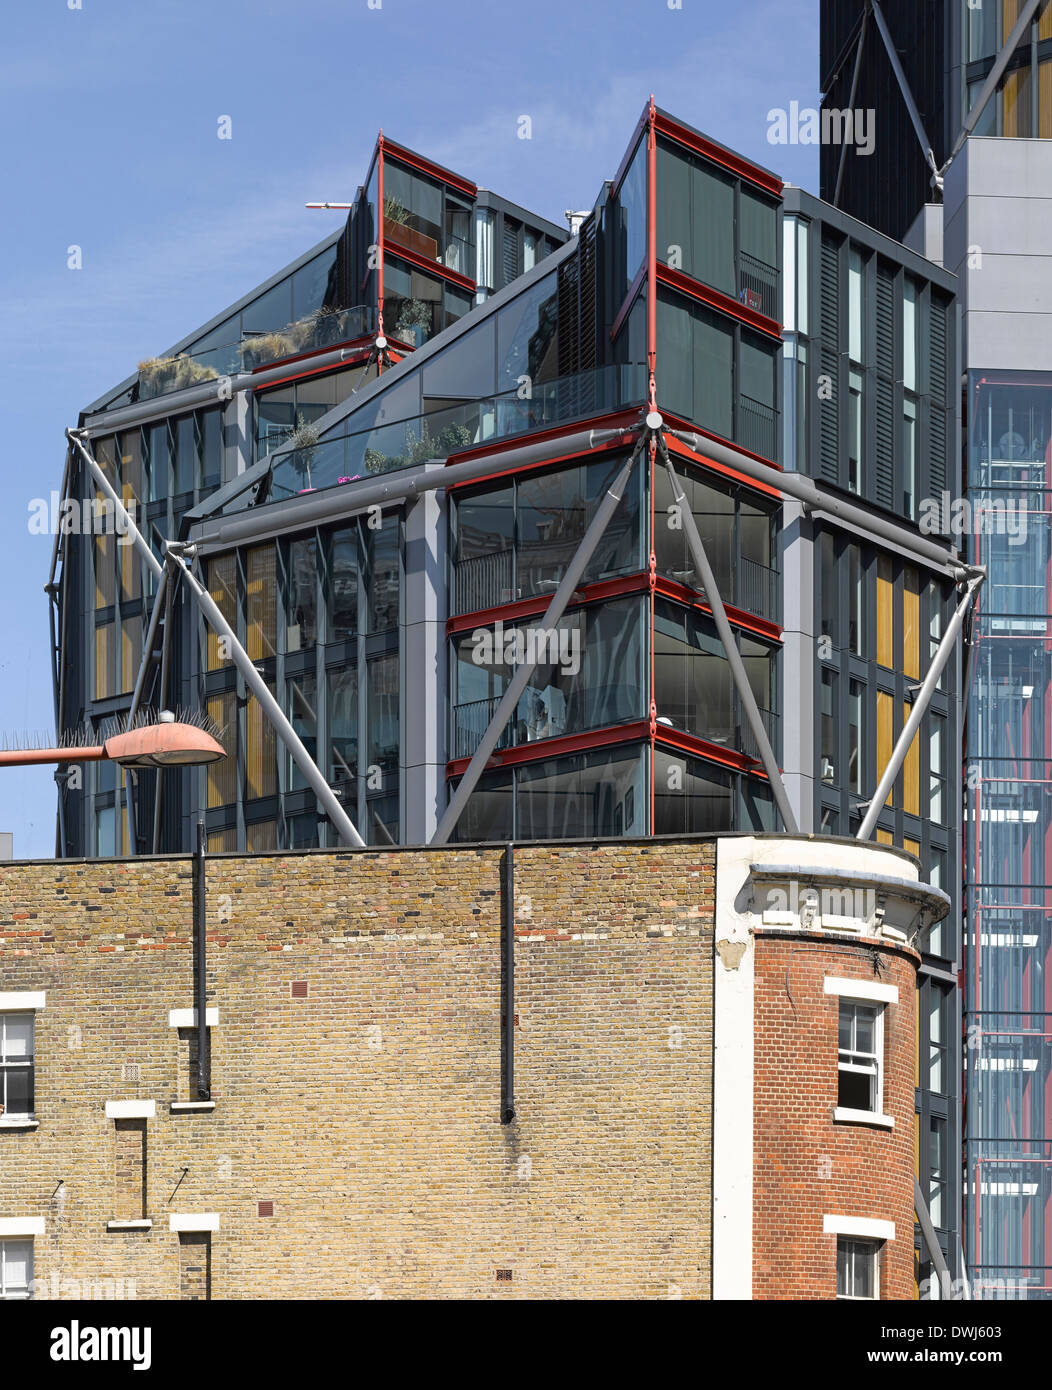 NEO Bankside, London, United Kingdom. Architect: Rogers Stirk Harbour + Partners, 2013. Side view form Suffolk street. Stock Photo